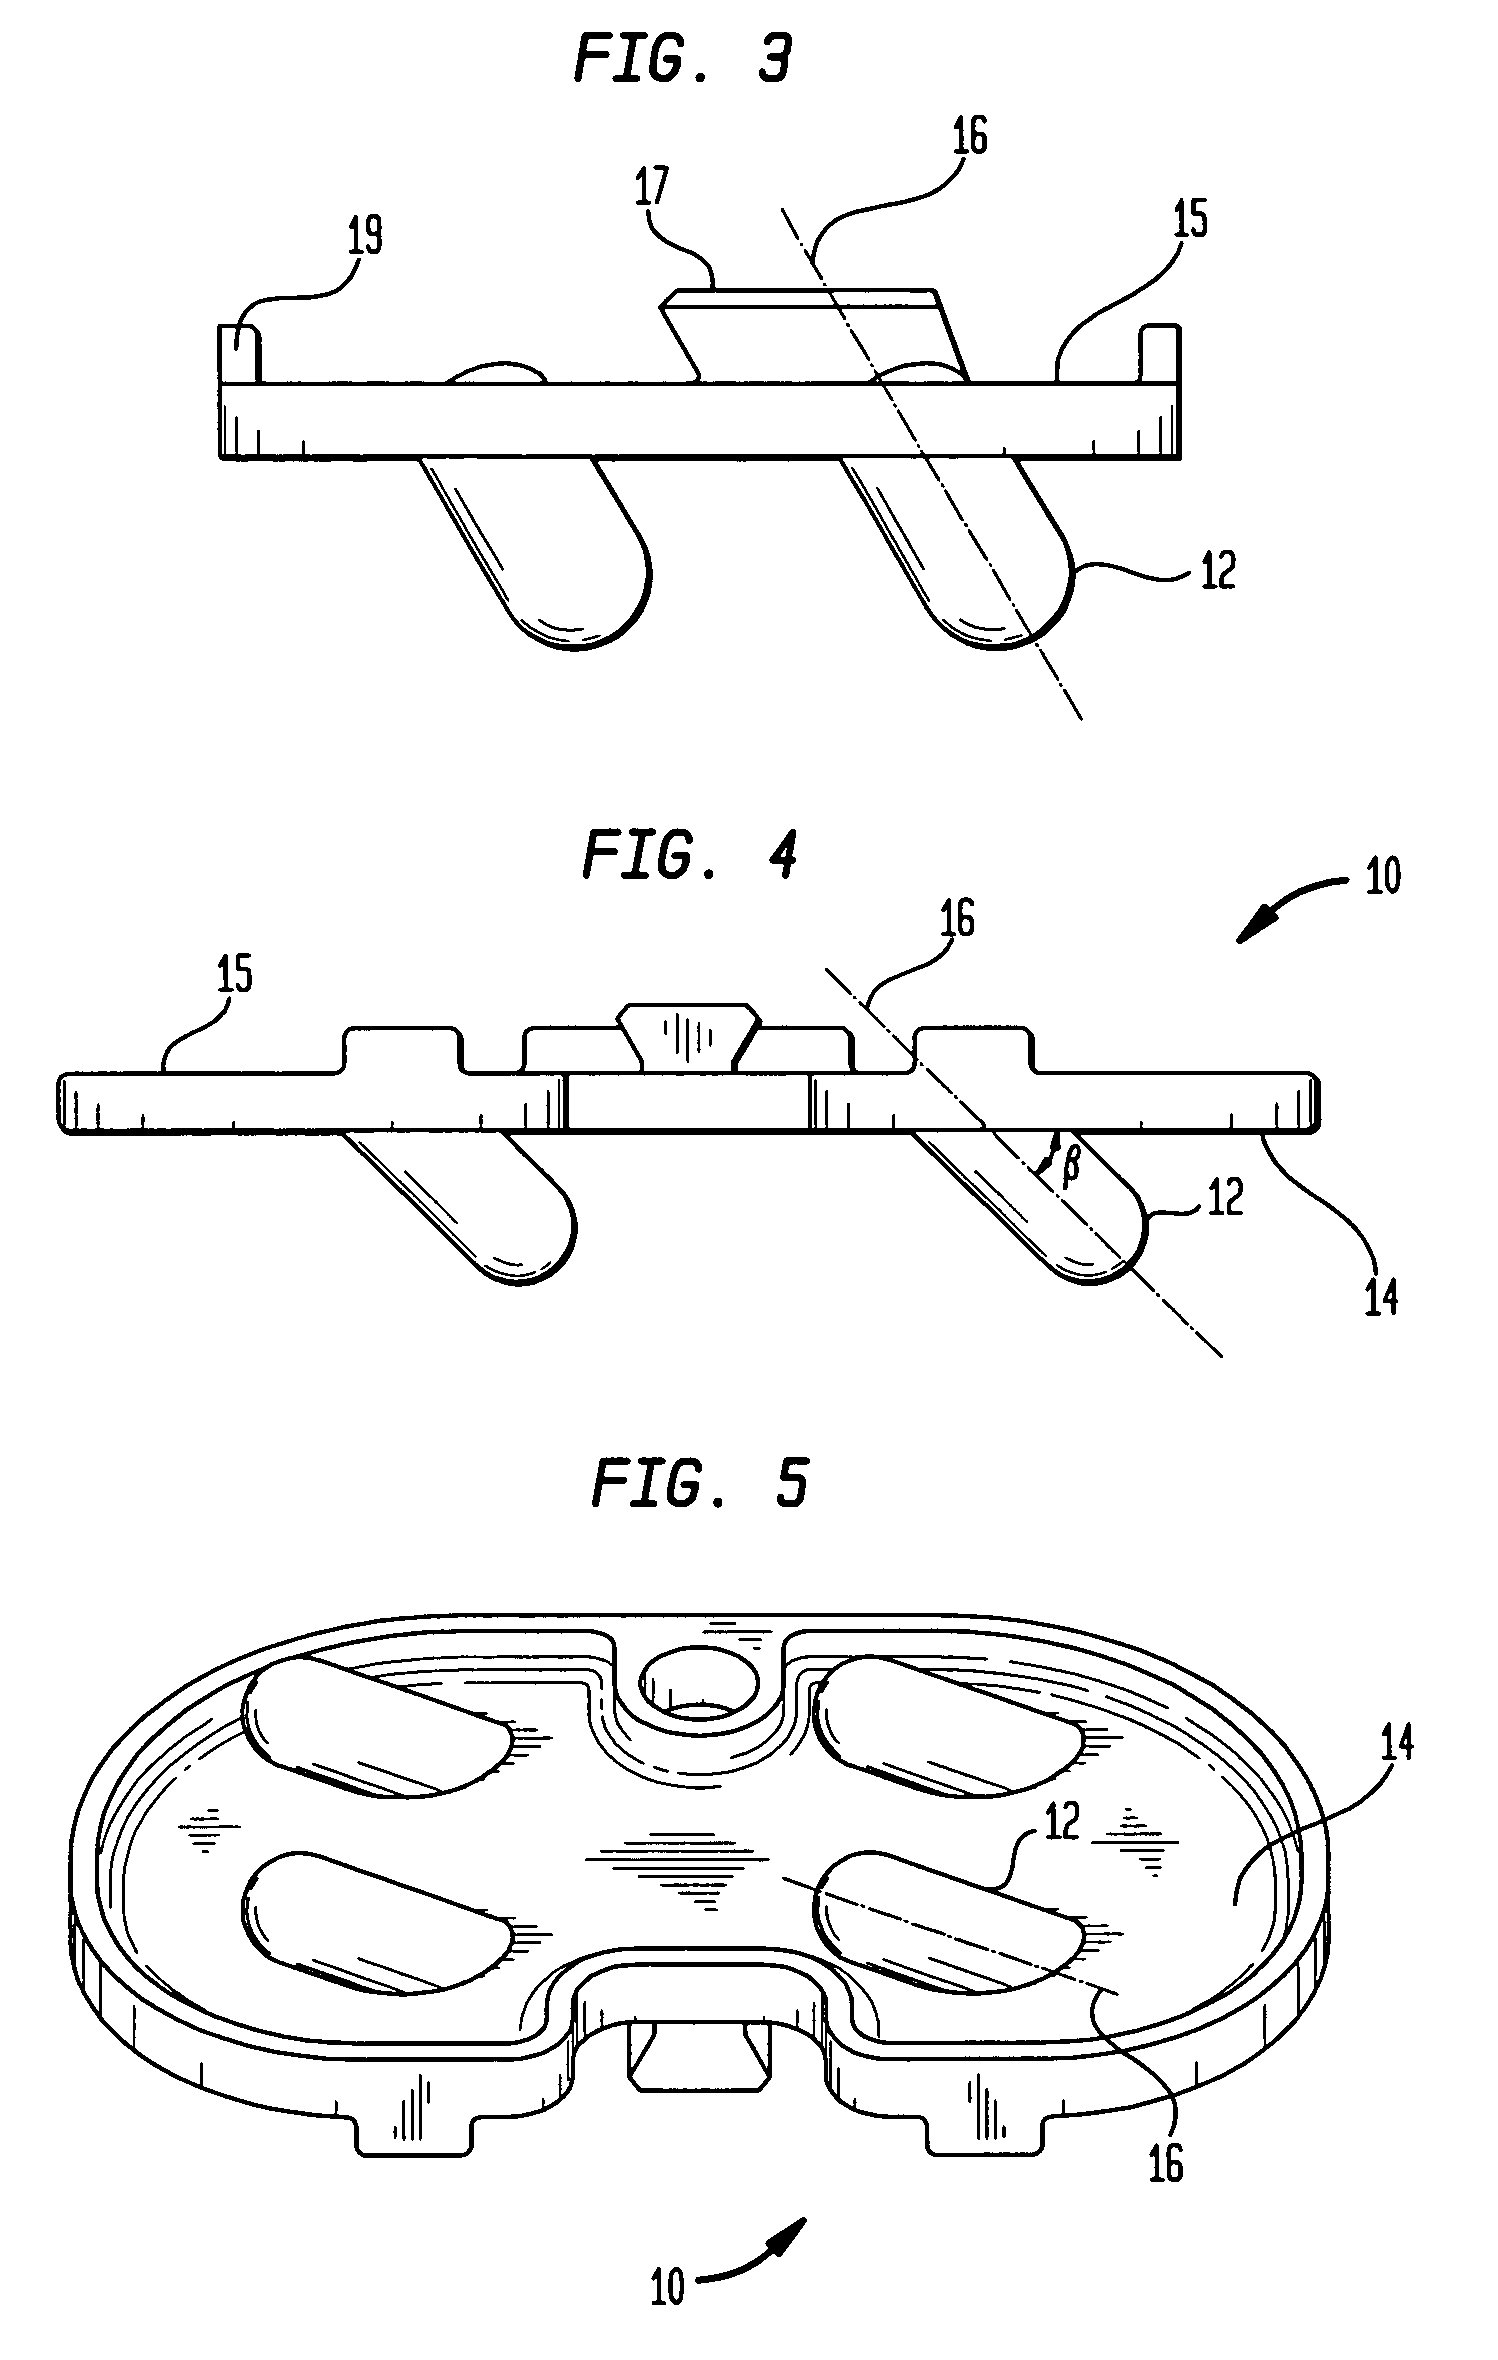 Orthopedic implant with angled pegs